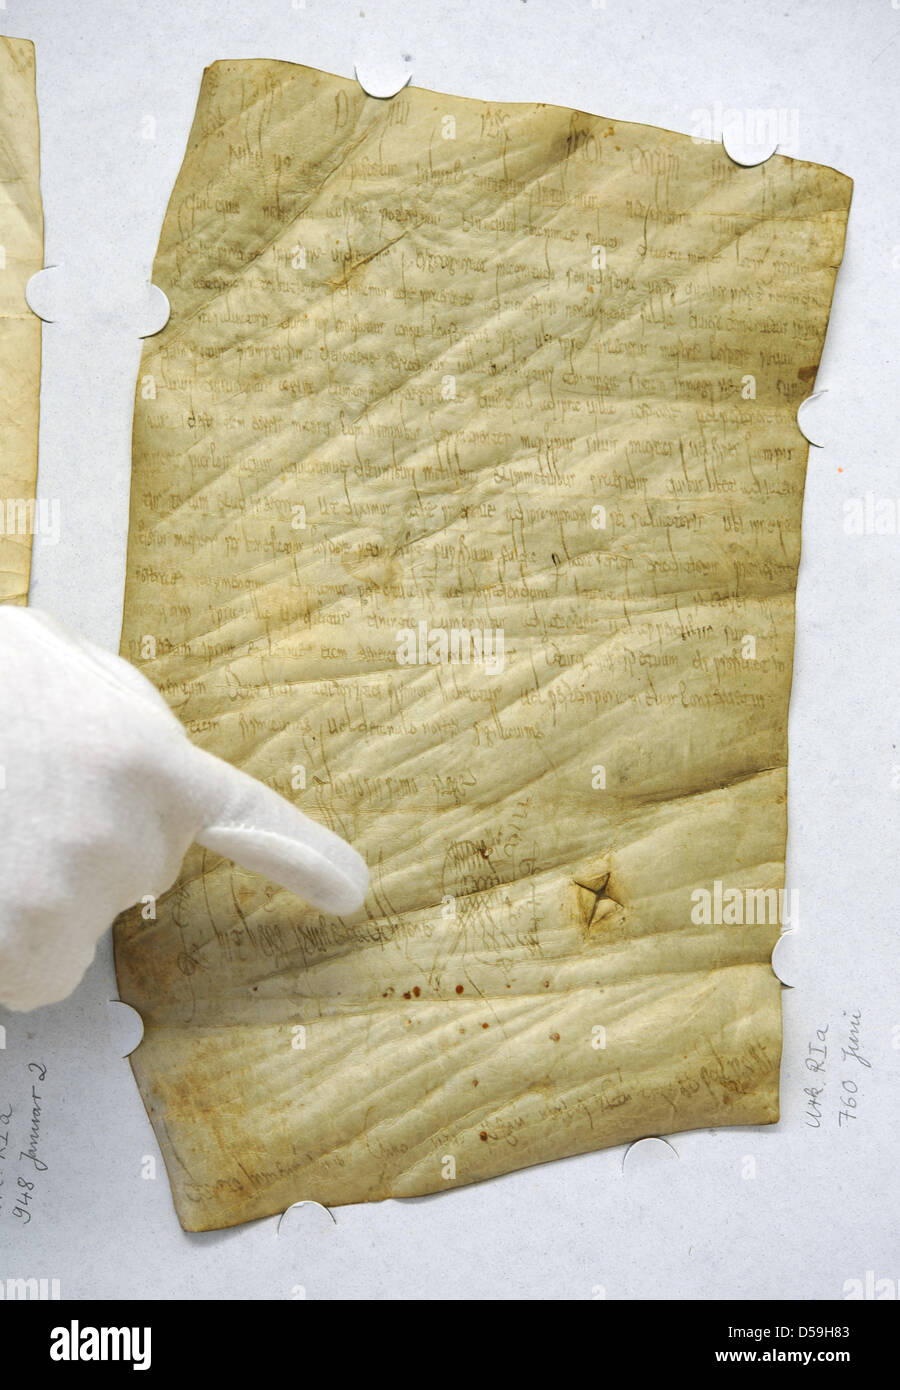 A hand points on the eldest preserved document issued by a knig in Marburg, Germany, 23 June 2010. The pergament was issued in 1250 AD by Carolingian King Pippn III, father of Charlemagne. In the document, Pippin III donates a large amount to the cloister of Fulda. Photo: Uwe Zucchi Stock Photo